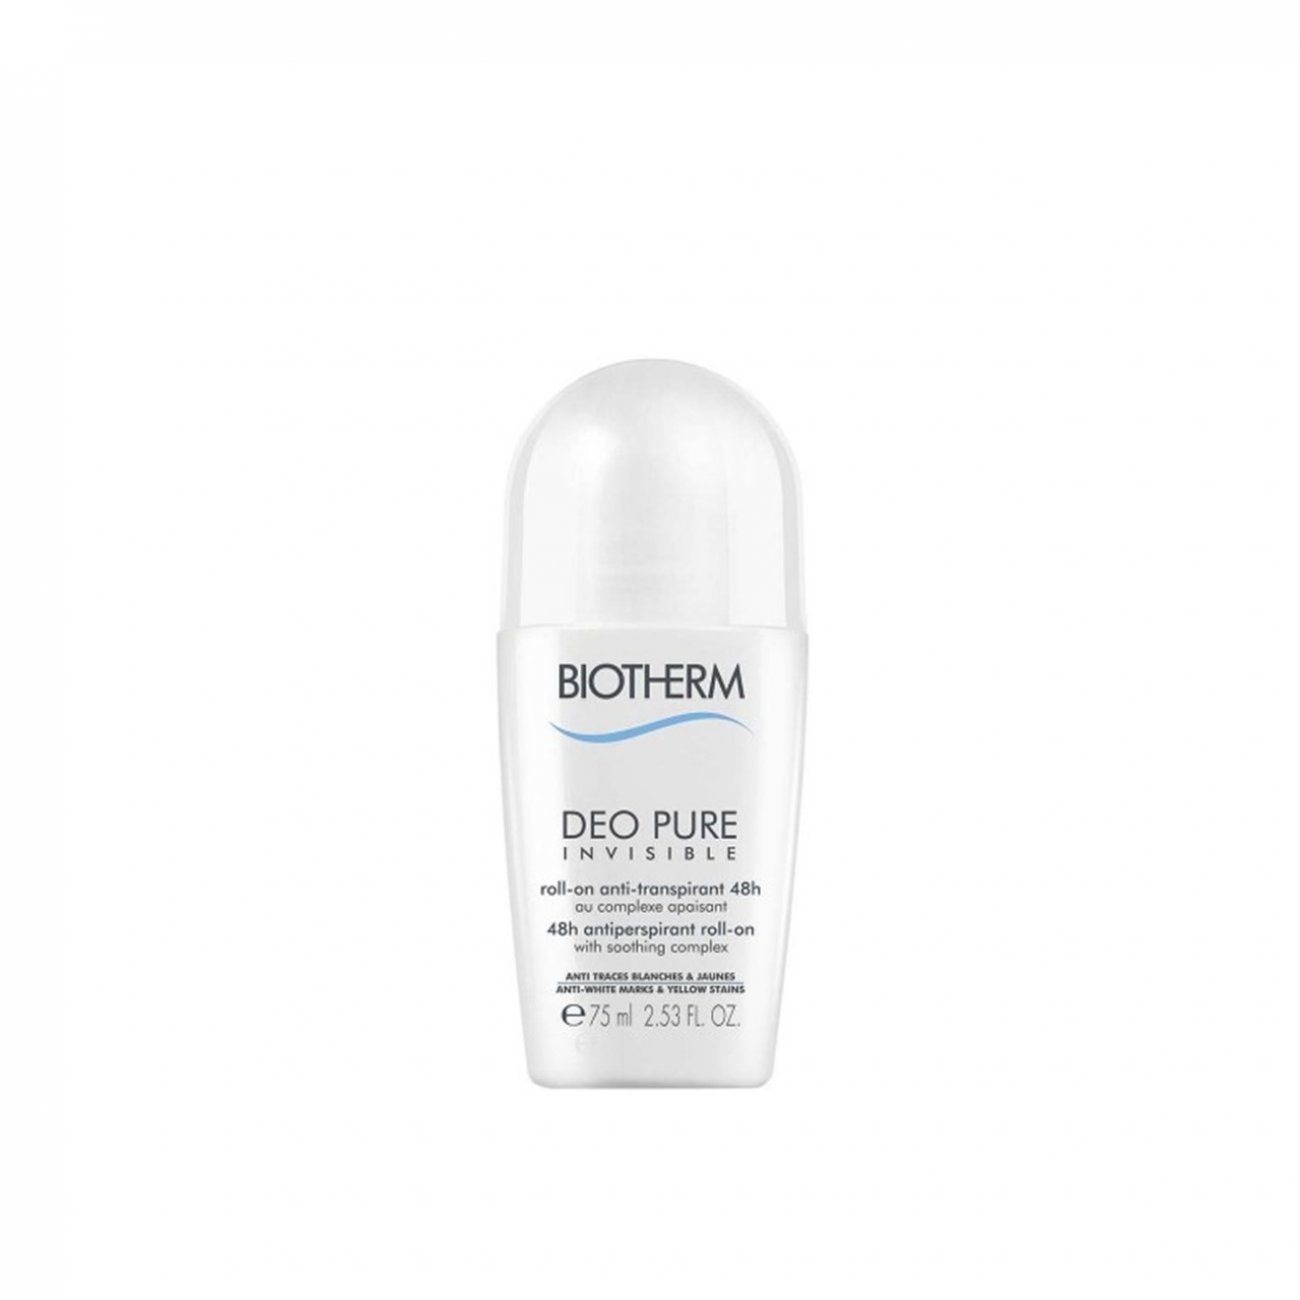 Buy Biotherm Deo Pure Invisible 48h Antiperspirant Roll-On 75ml (2.54fl ·